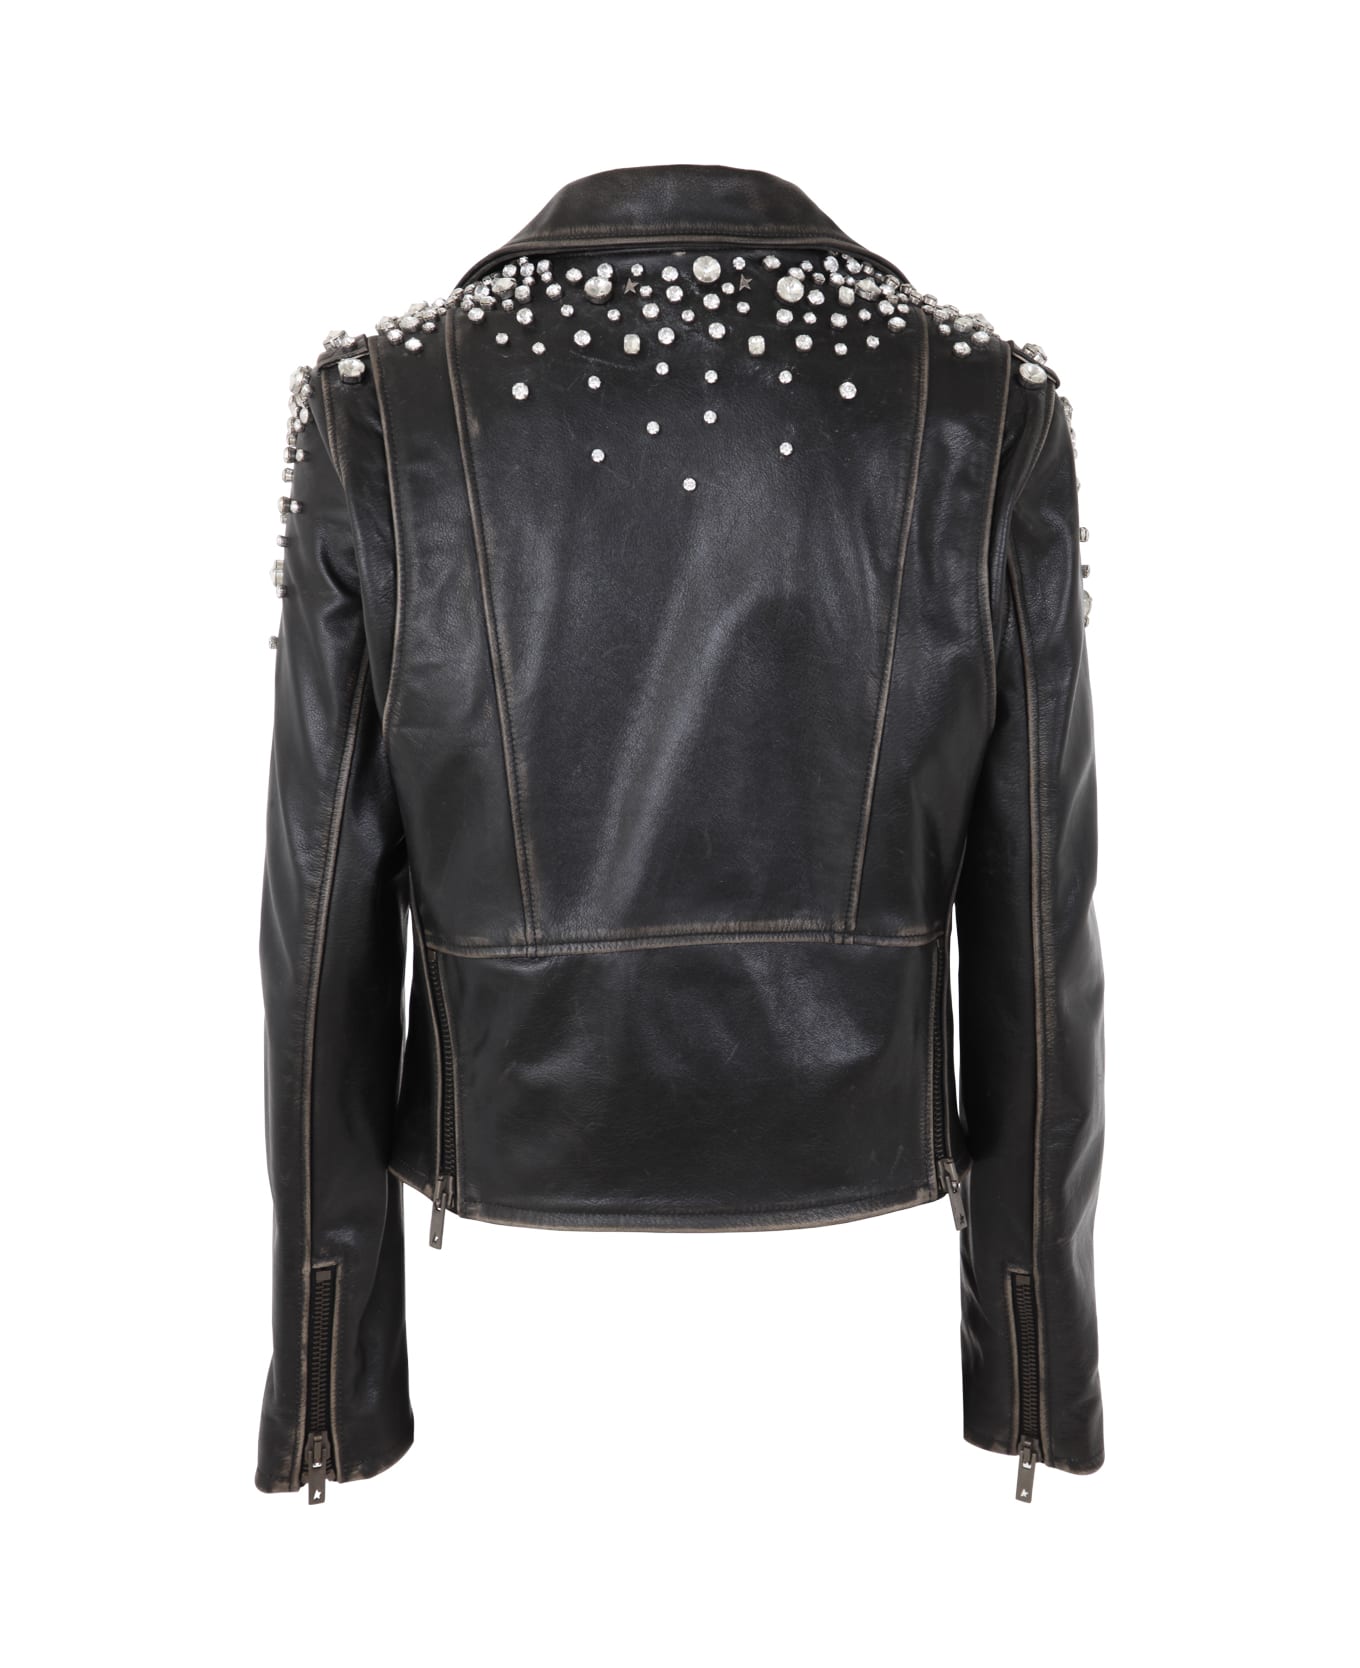 Golden Goose Golden Chiodo Jacket Distressed Bull Leather With Crystals Stones - Black